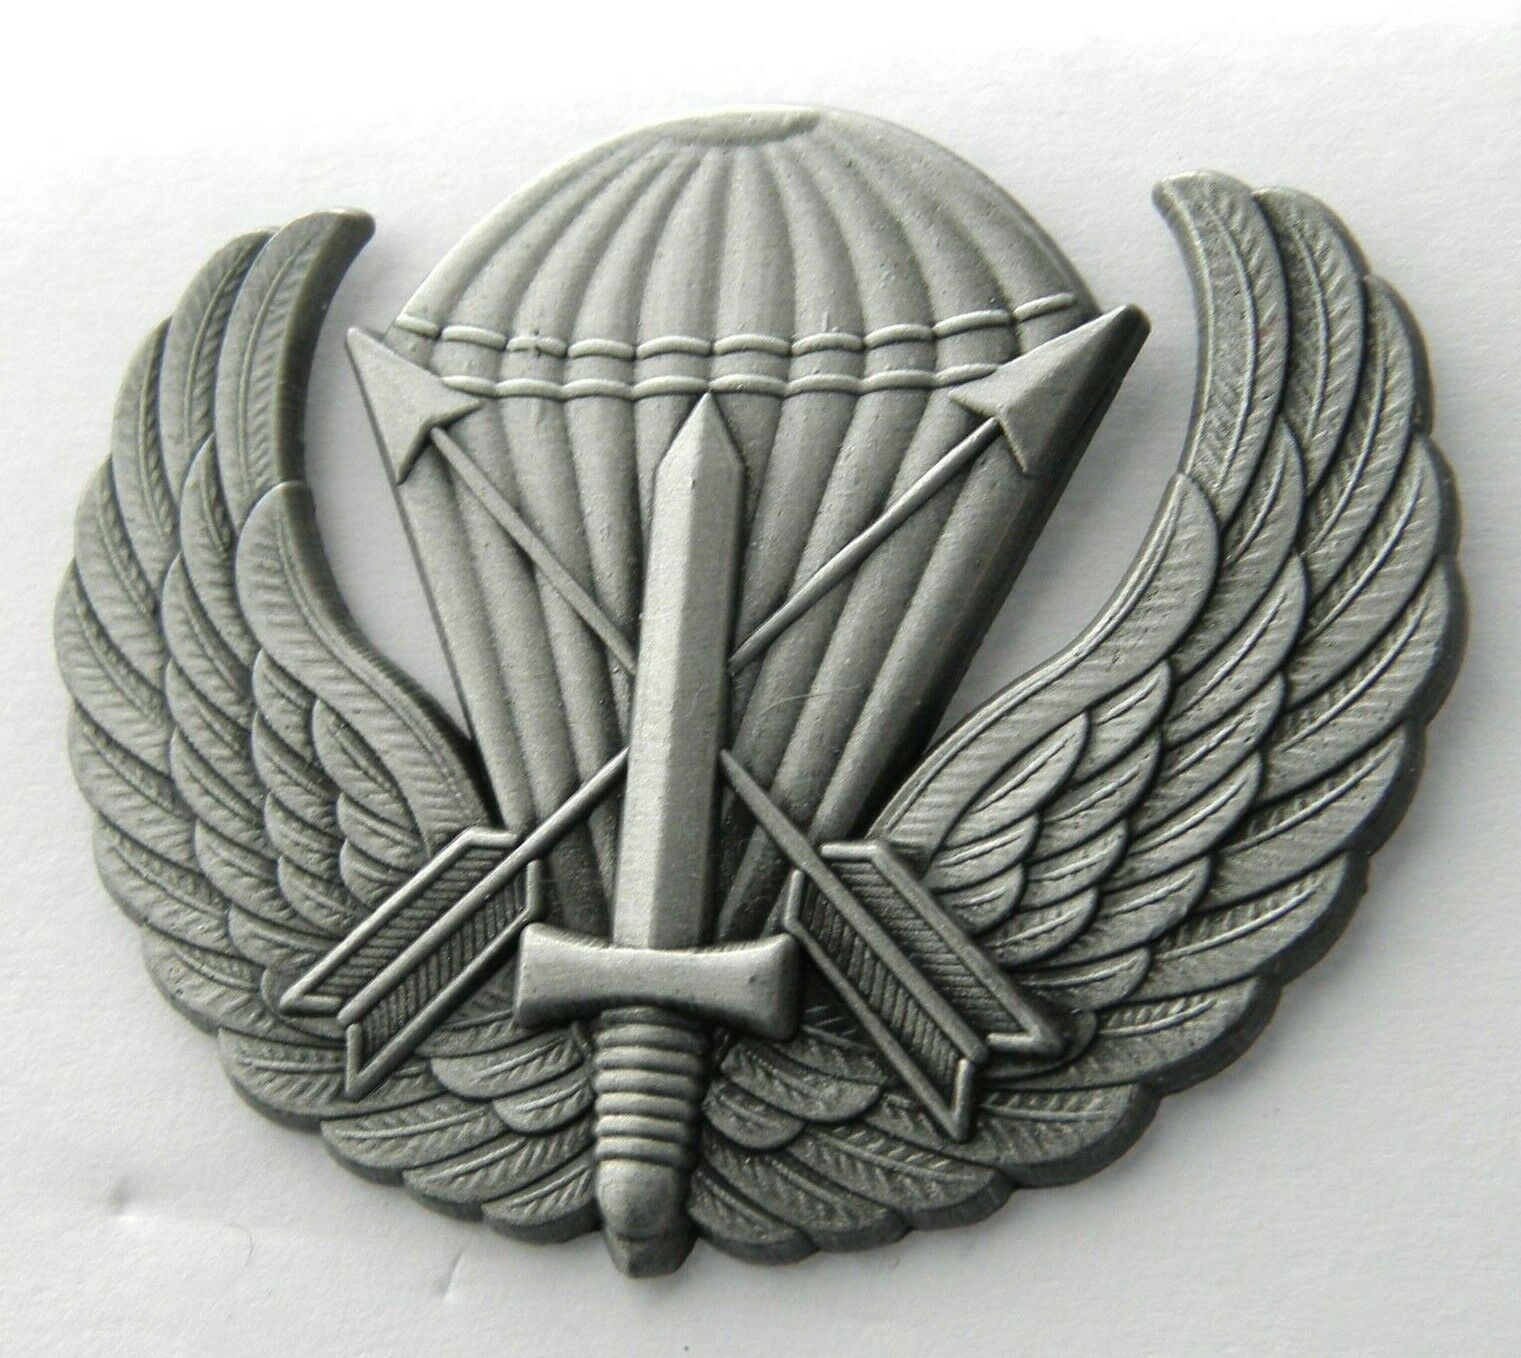 US ARMY AIRBORNE SPECIAL FORCES LAPEL PIN BADGE 1 INCH 